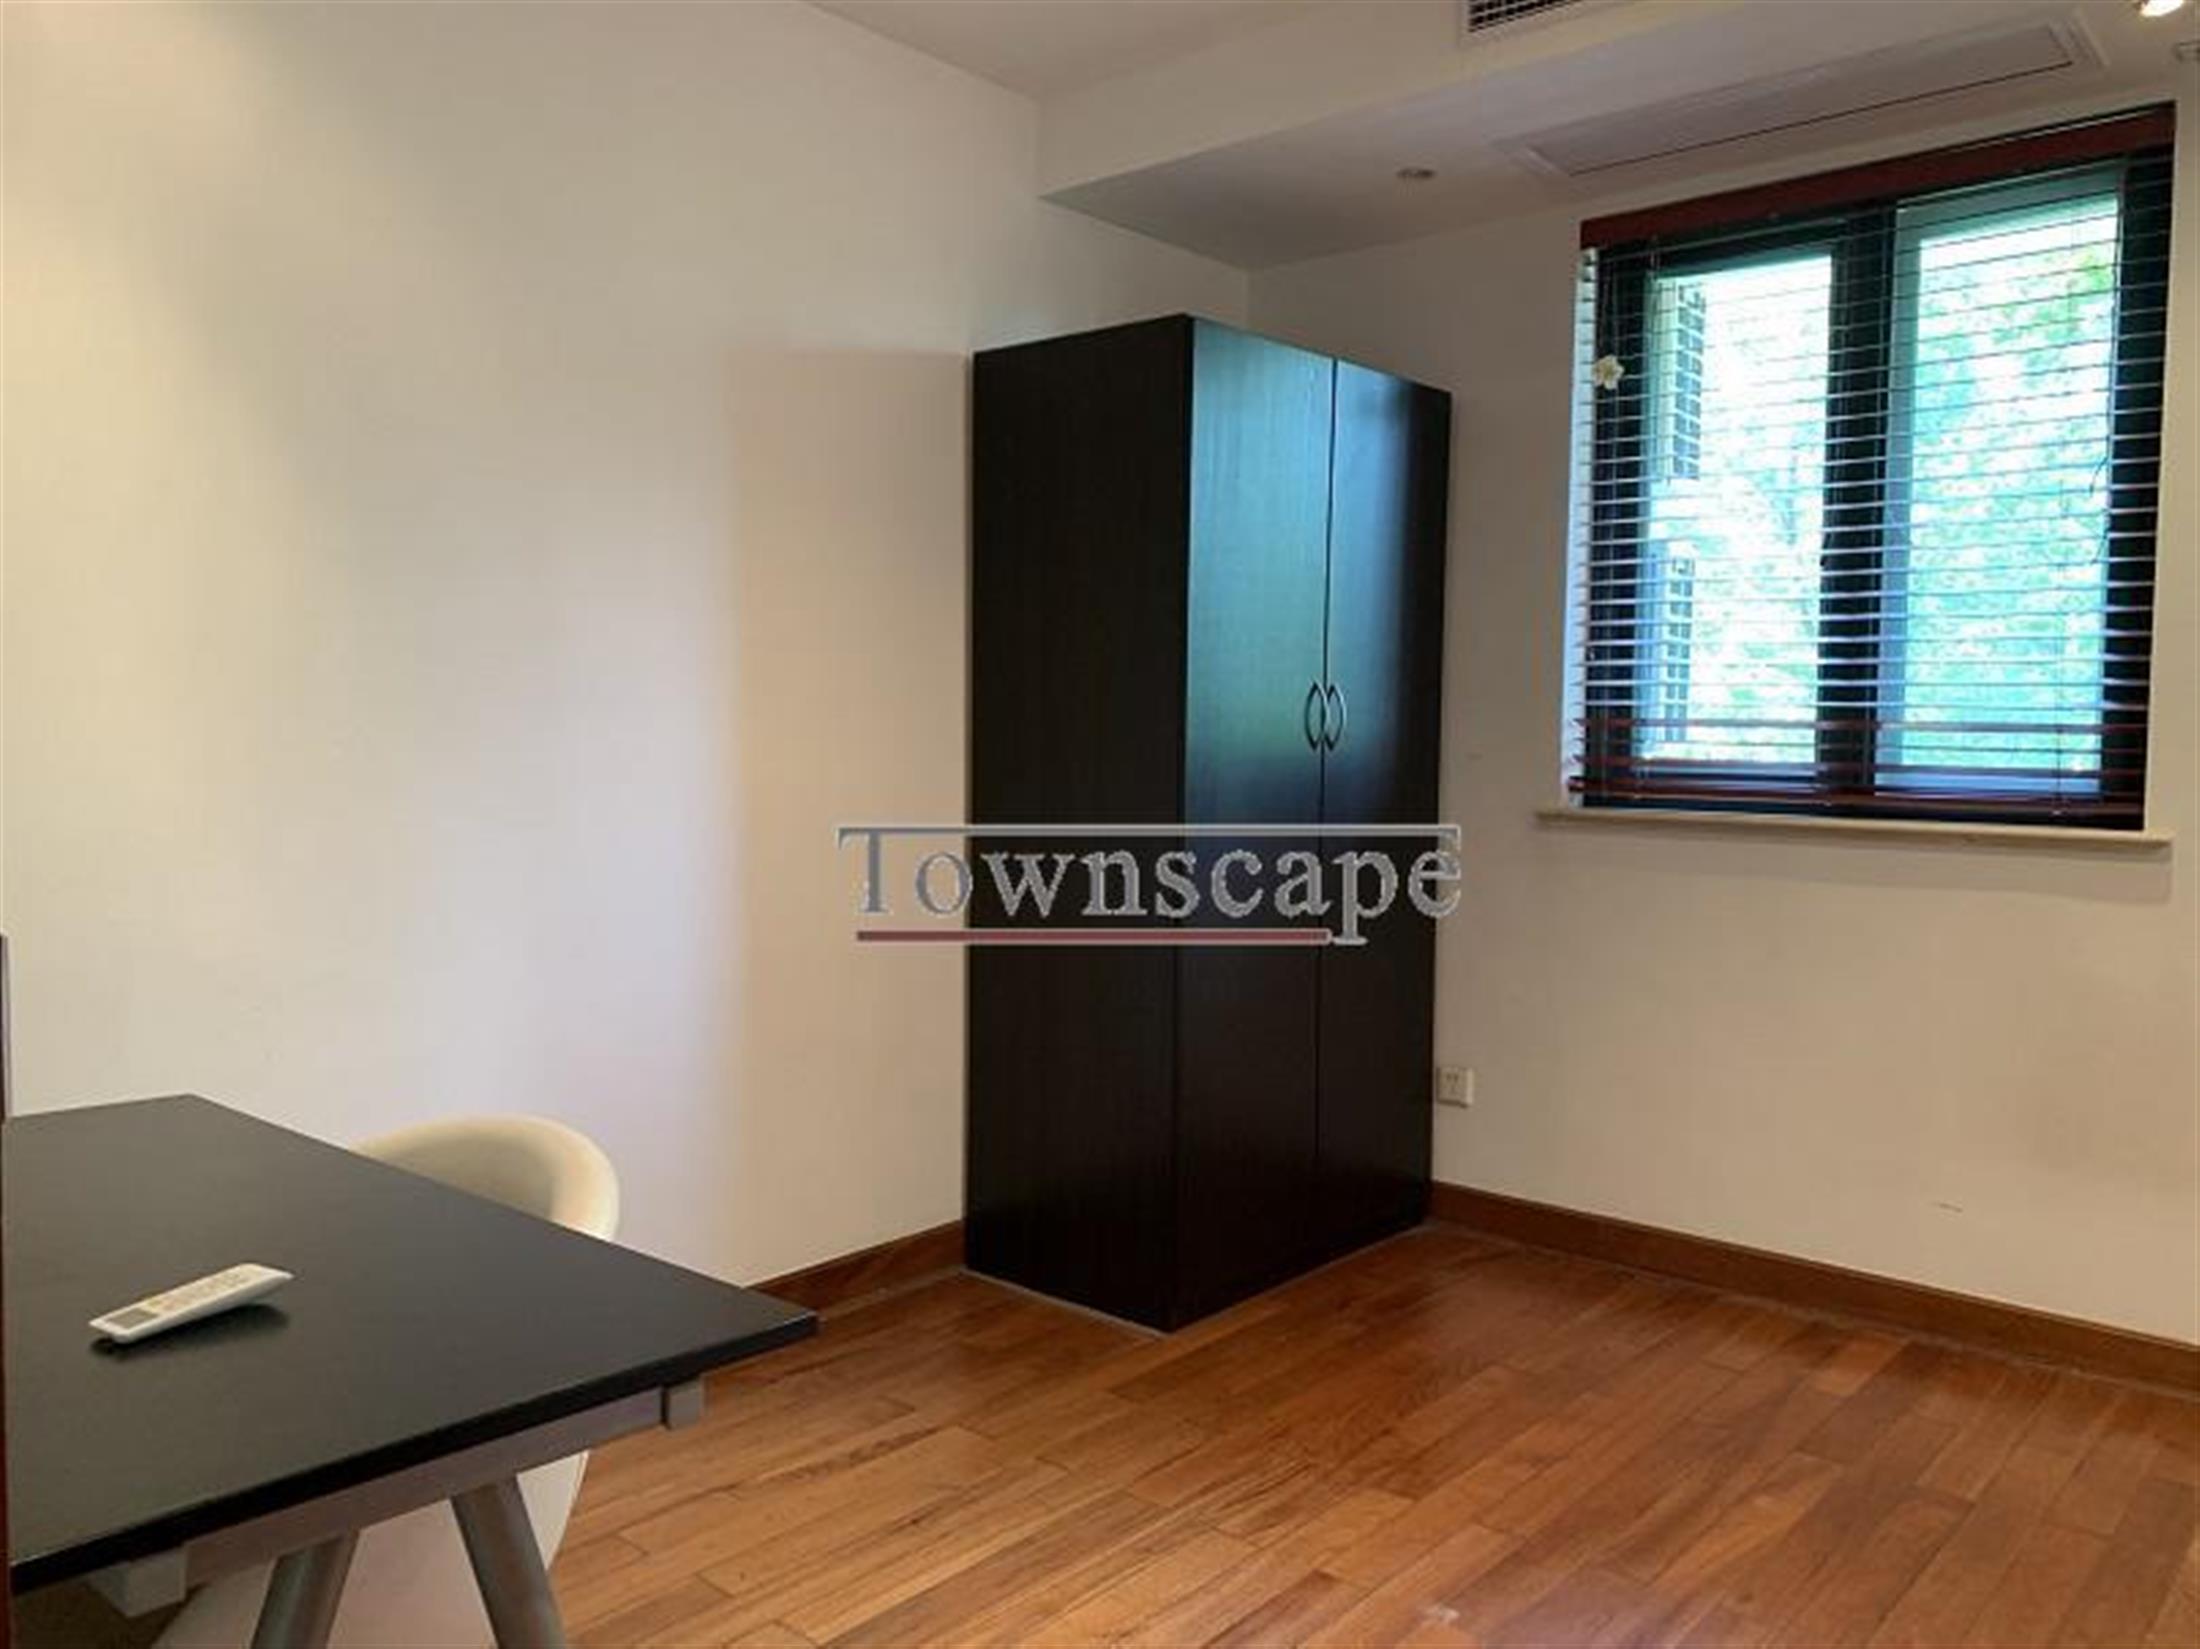 Nice floors Spacious Yanlord Garden Apartment in Lujiazui CBD for Rent in Pudong, Shanghai